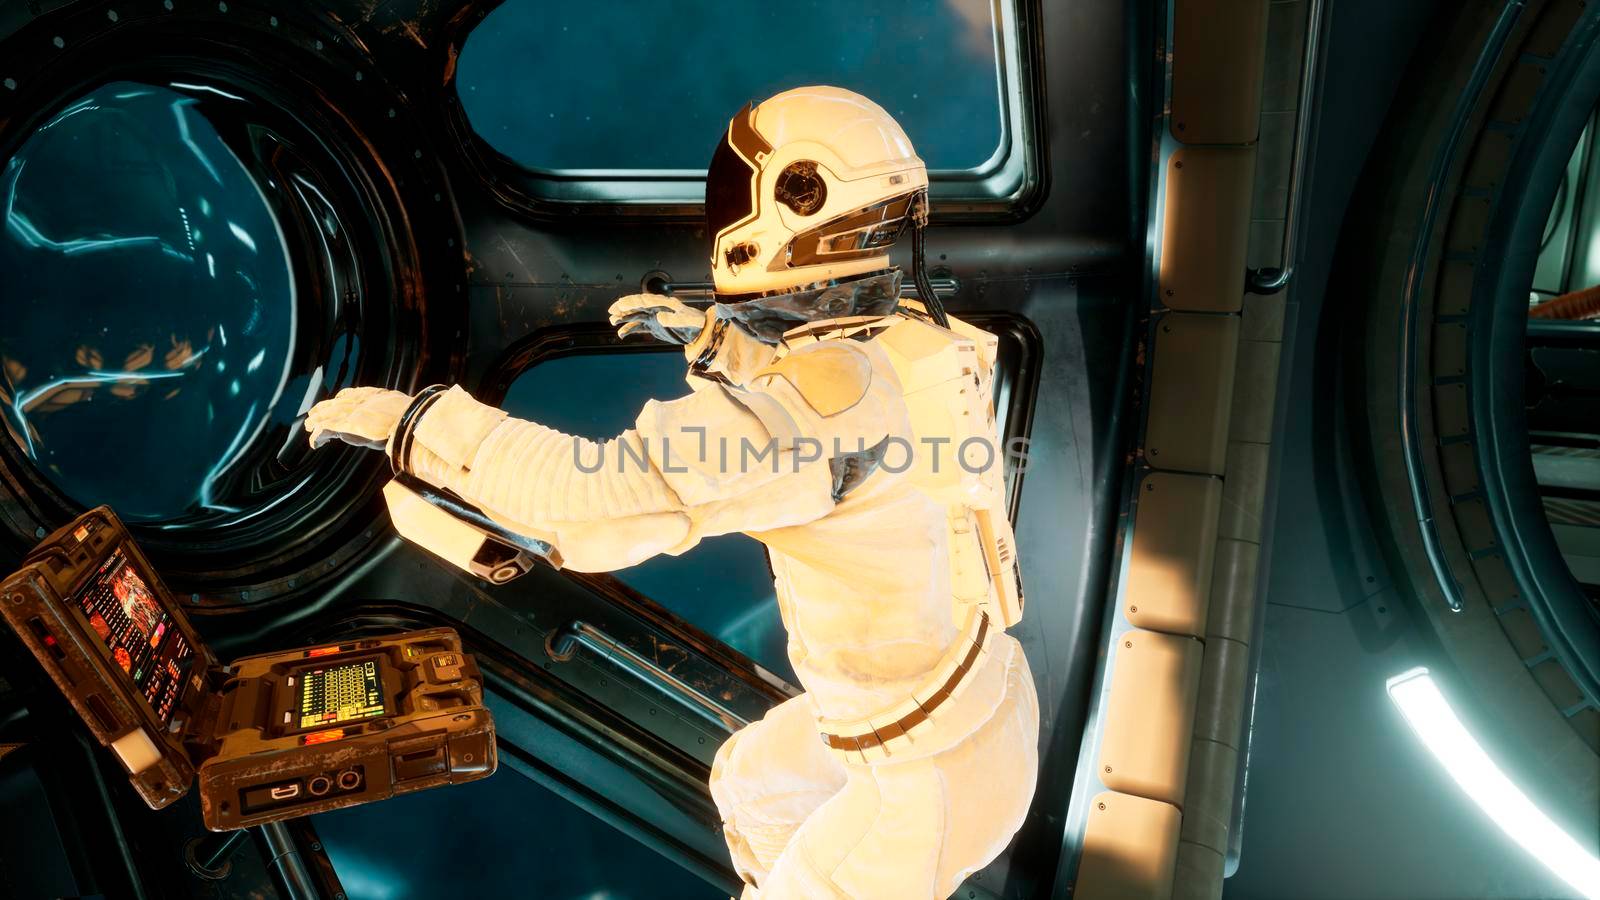 An astronaut in a spaceship is watching through a porthole for an alien, unexplored planet. View of the spacecraft with an astronaut.